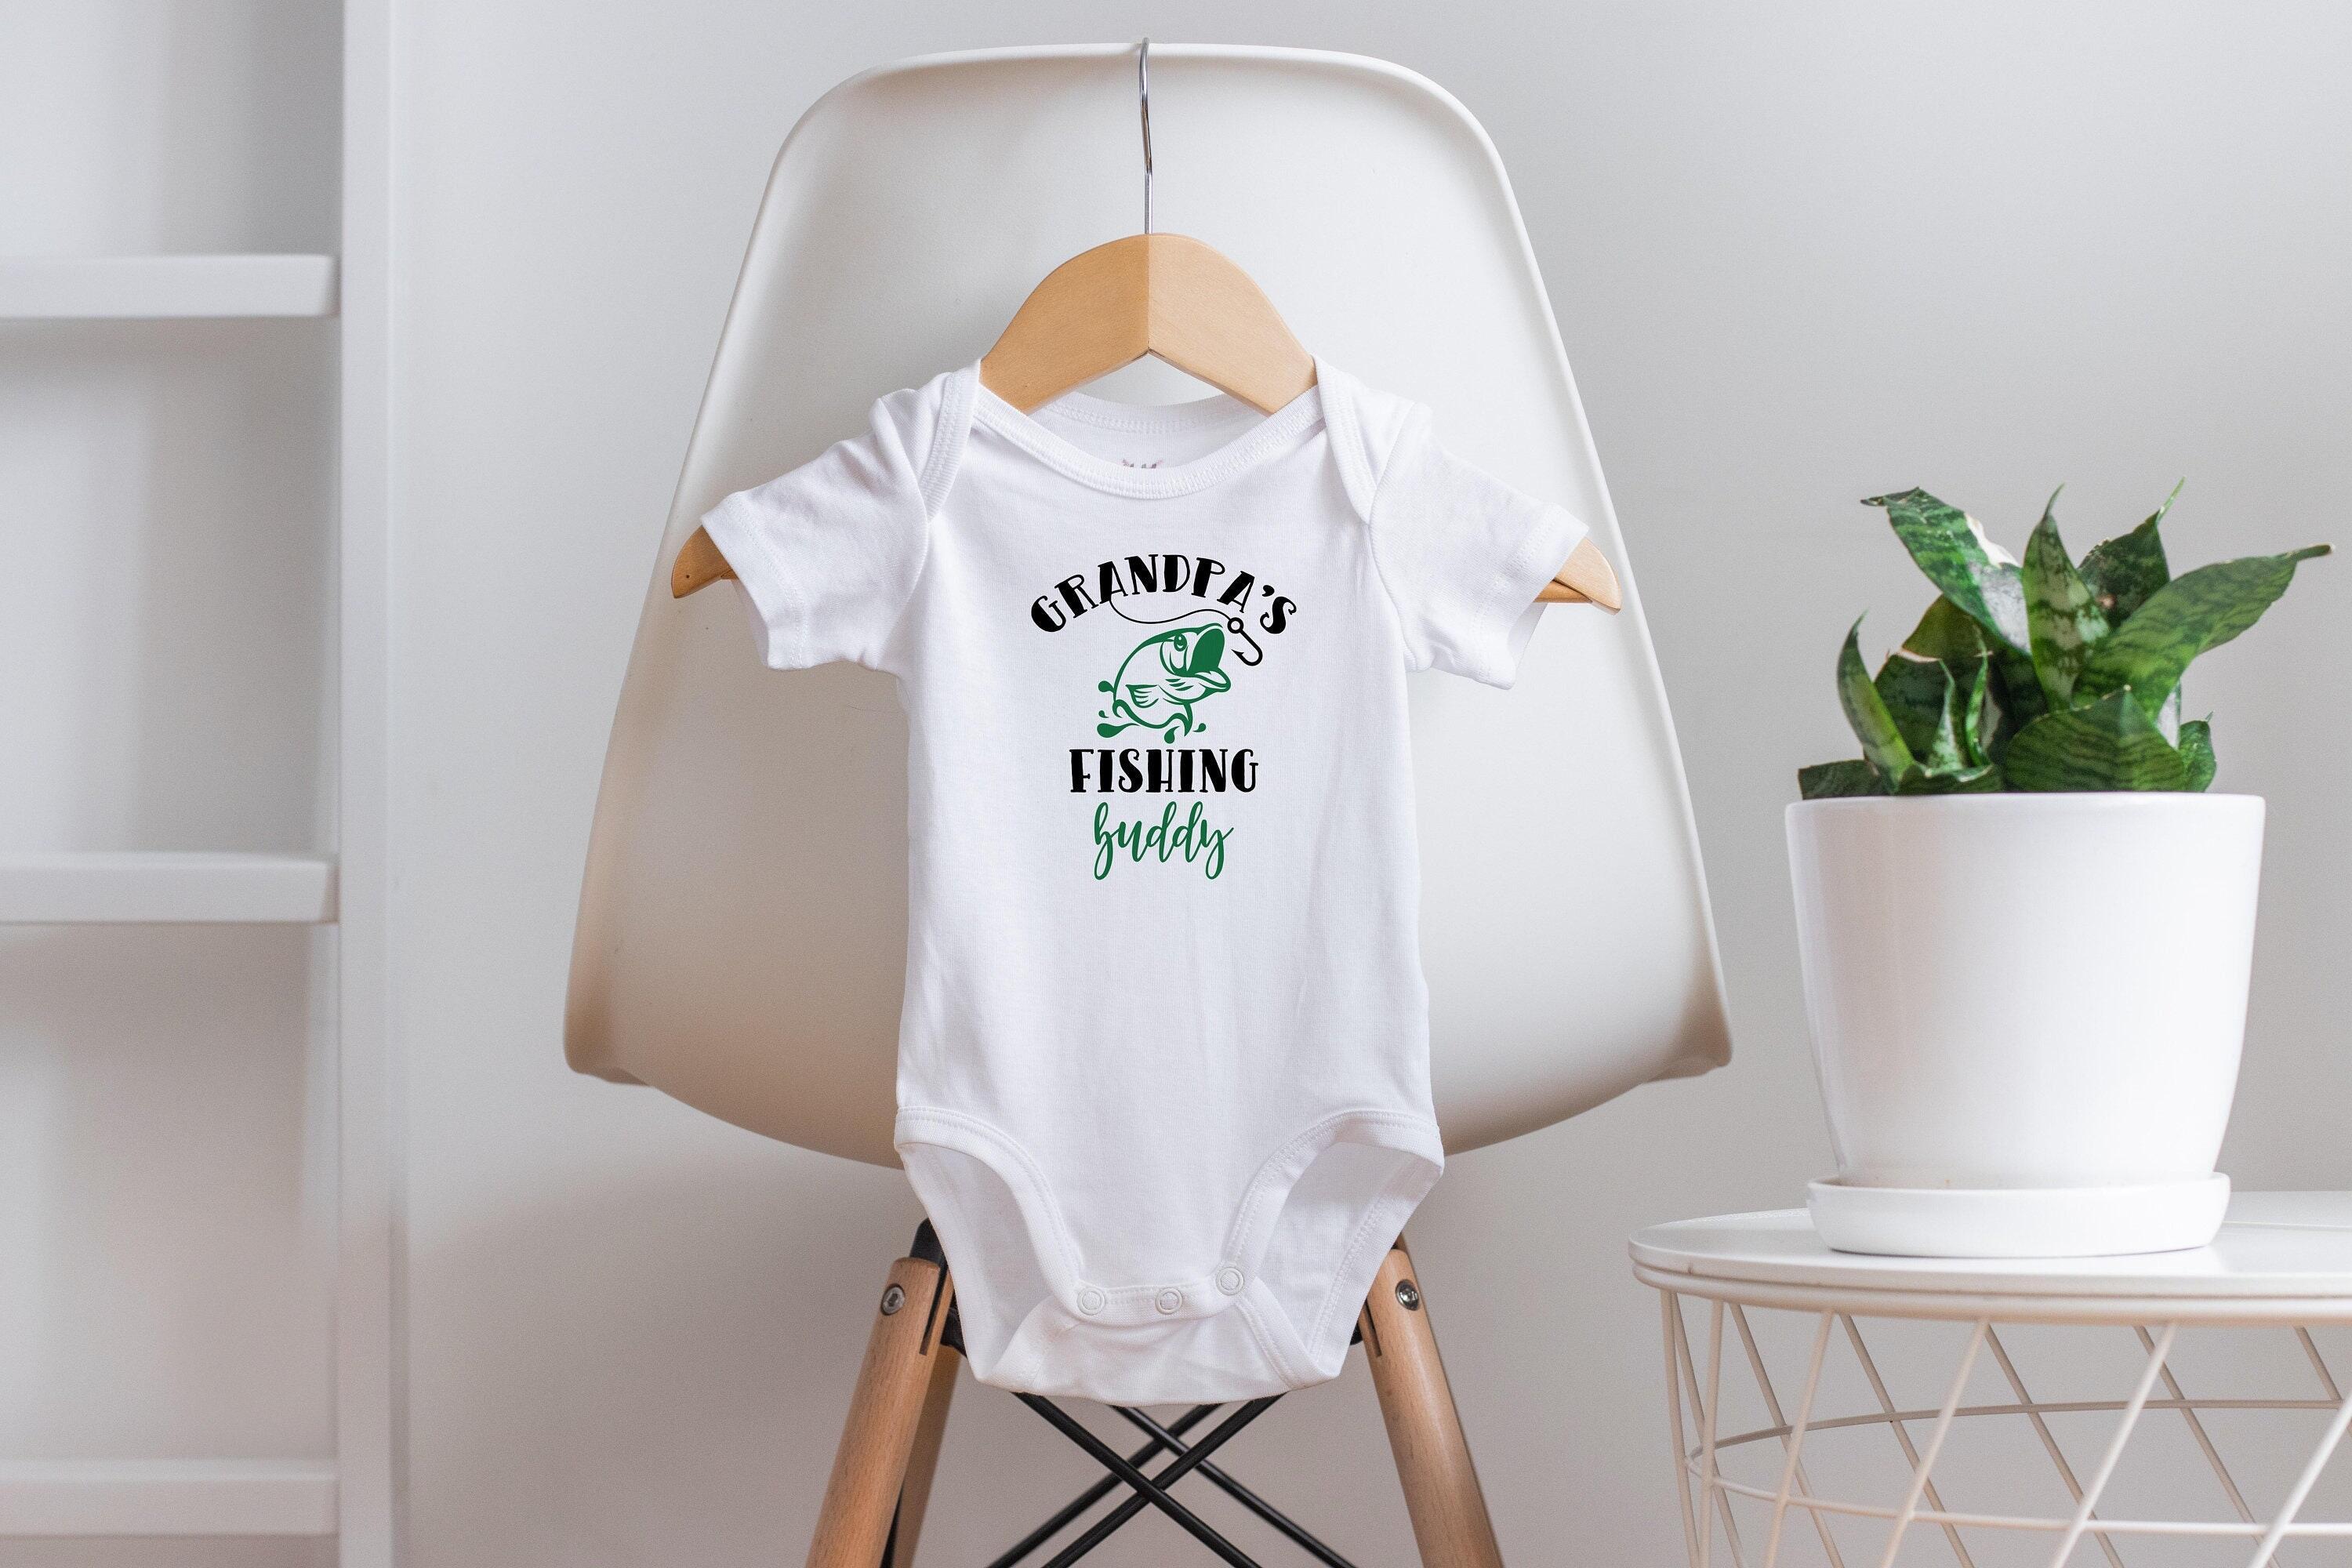 Clothing & Accessories :: Kids & Baby :: Baby Clothing :: Grandpa's Fishing  Buddy Onesie®, Fishing with Grandpa Onesie®, Grandpa Fishing Onesie®, Baby  Shower Gift, Fishing Baby Clothes, Baby Boy